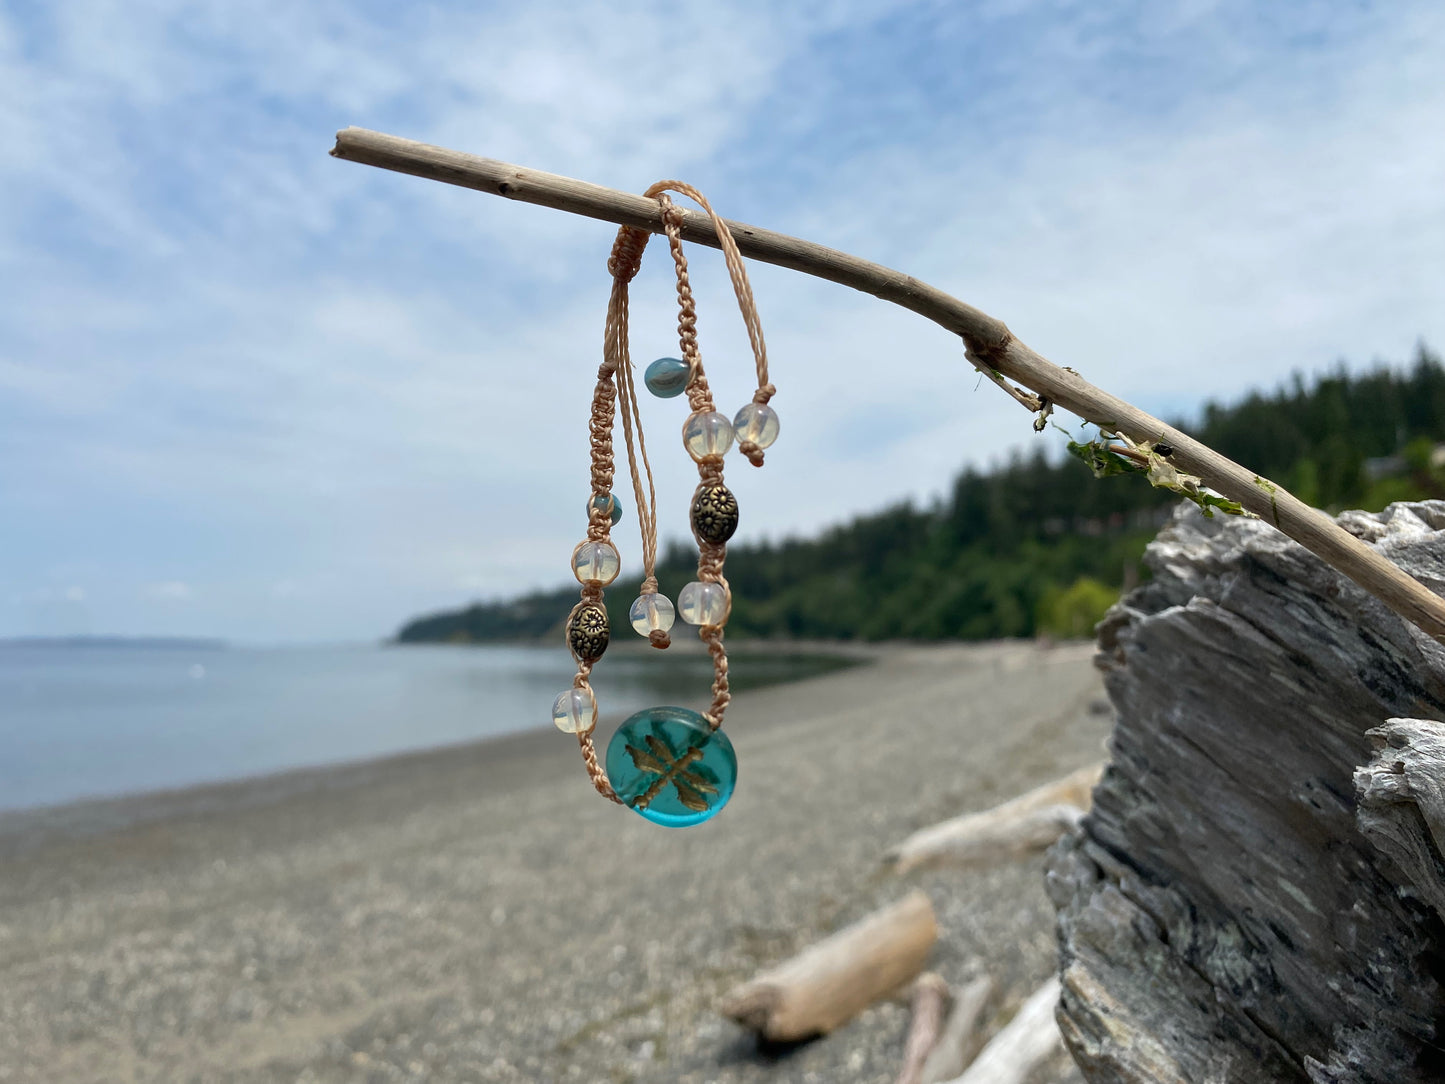 Beautiful Woven bracelet with aqua dragonfly coin bead , sparkle beads, antique copper beads on a piece of driftwood by the ocean